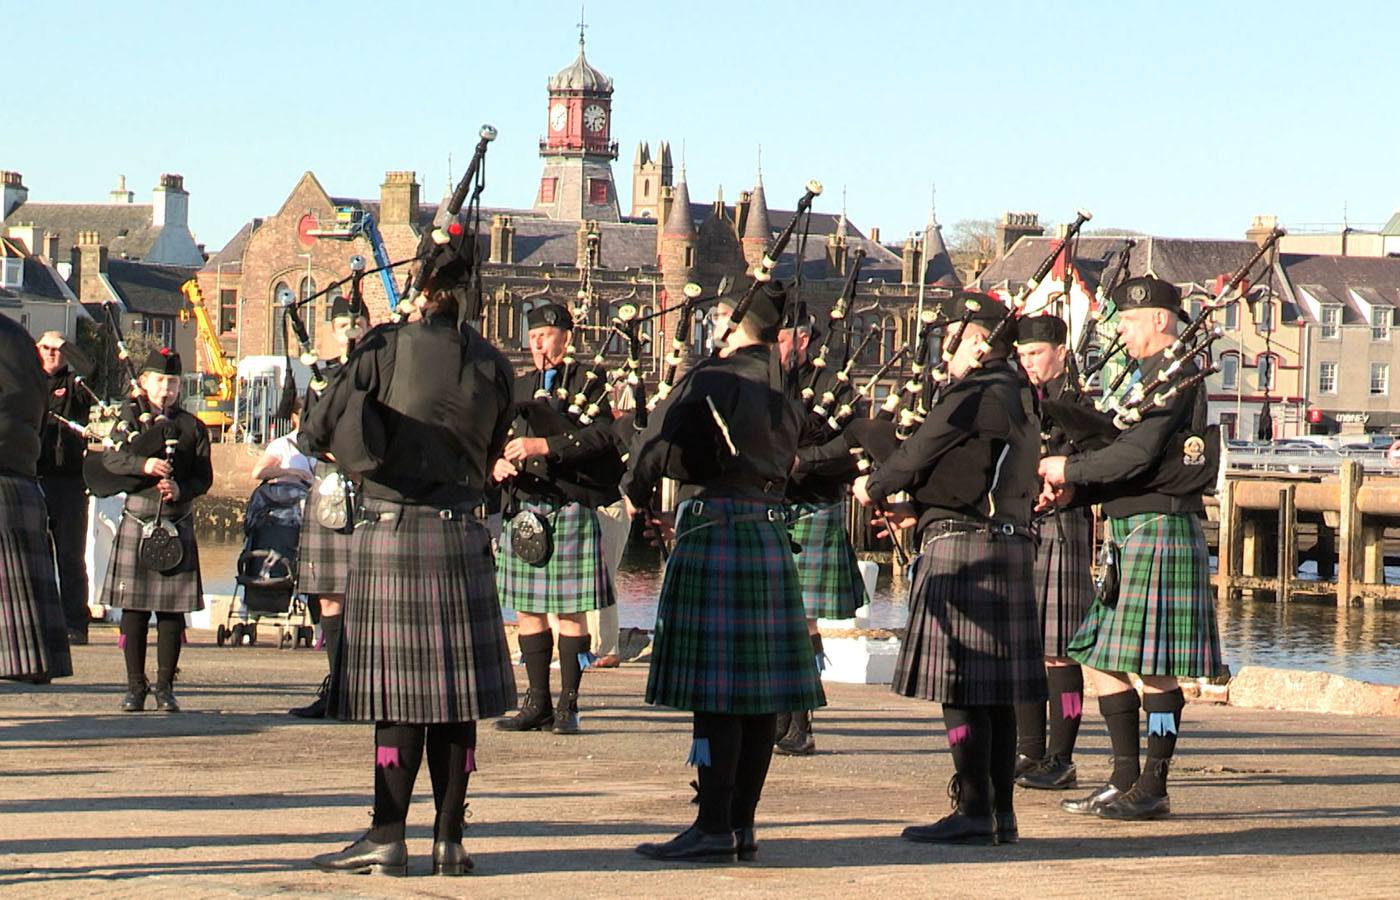 Pipe band performing at commemoration ceremony in Stornoway.